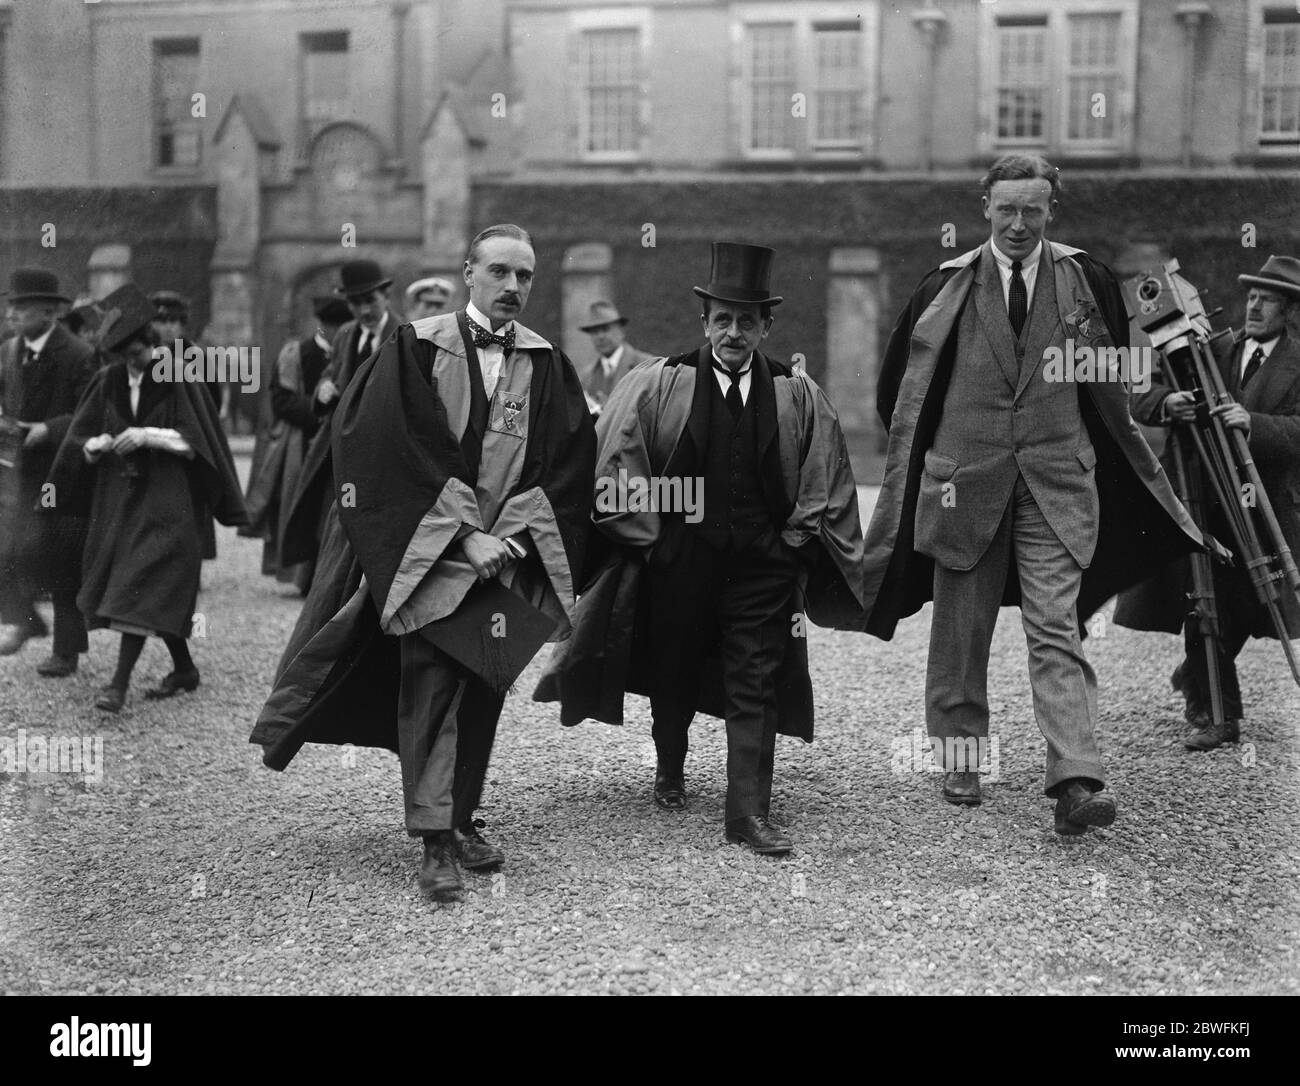 St Andrews Celebrations Sir James Matthew Barrie, 1st Baronet in the middle 4 May 1922 Stock Photo